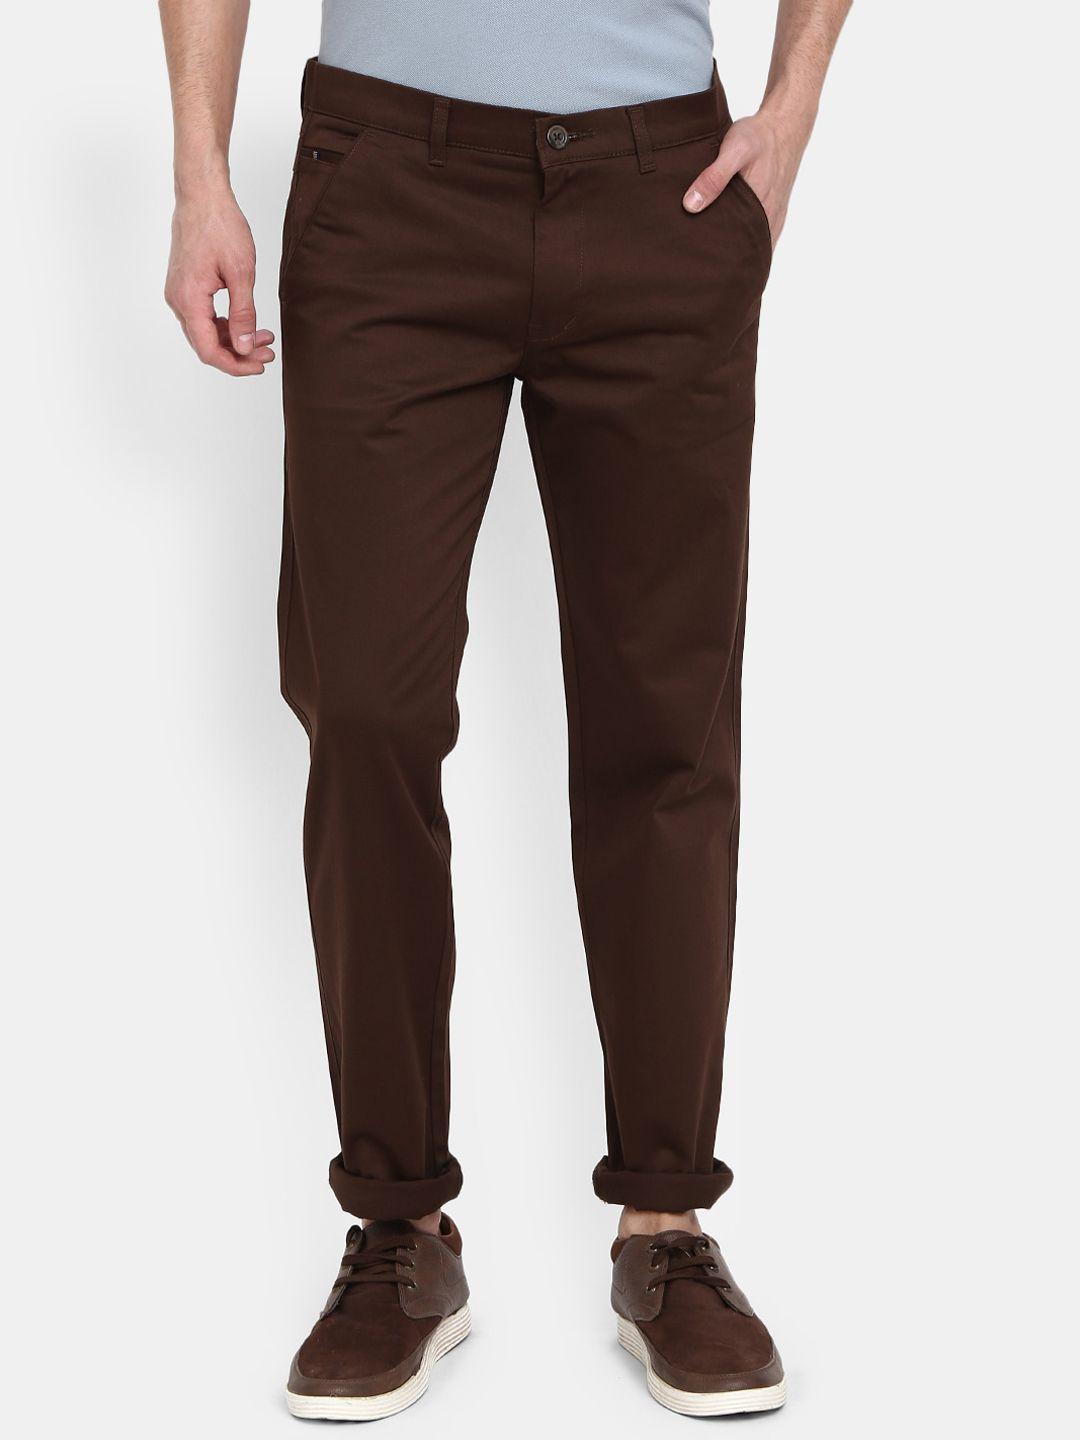 v-mart men brown classic slim fit chinos trousers